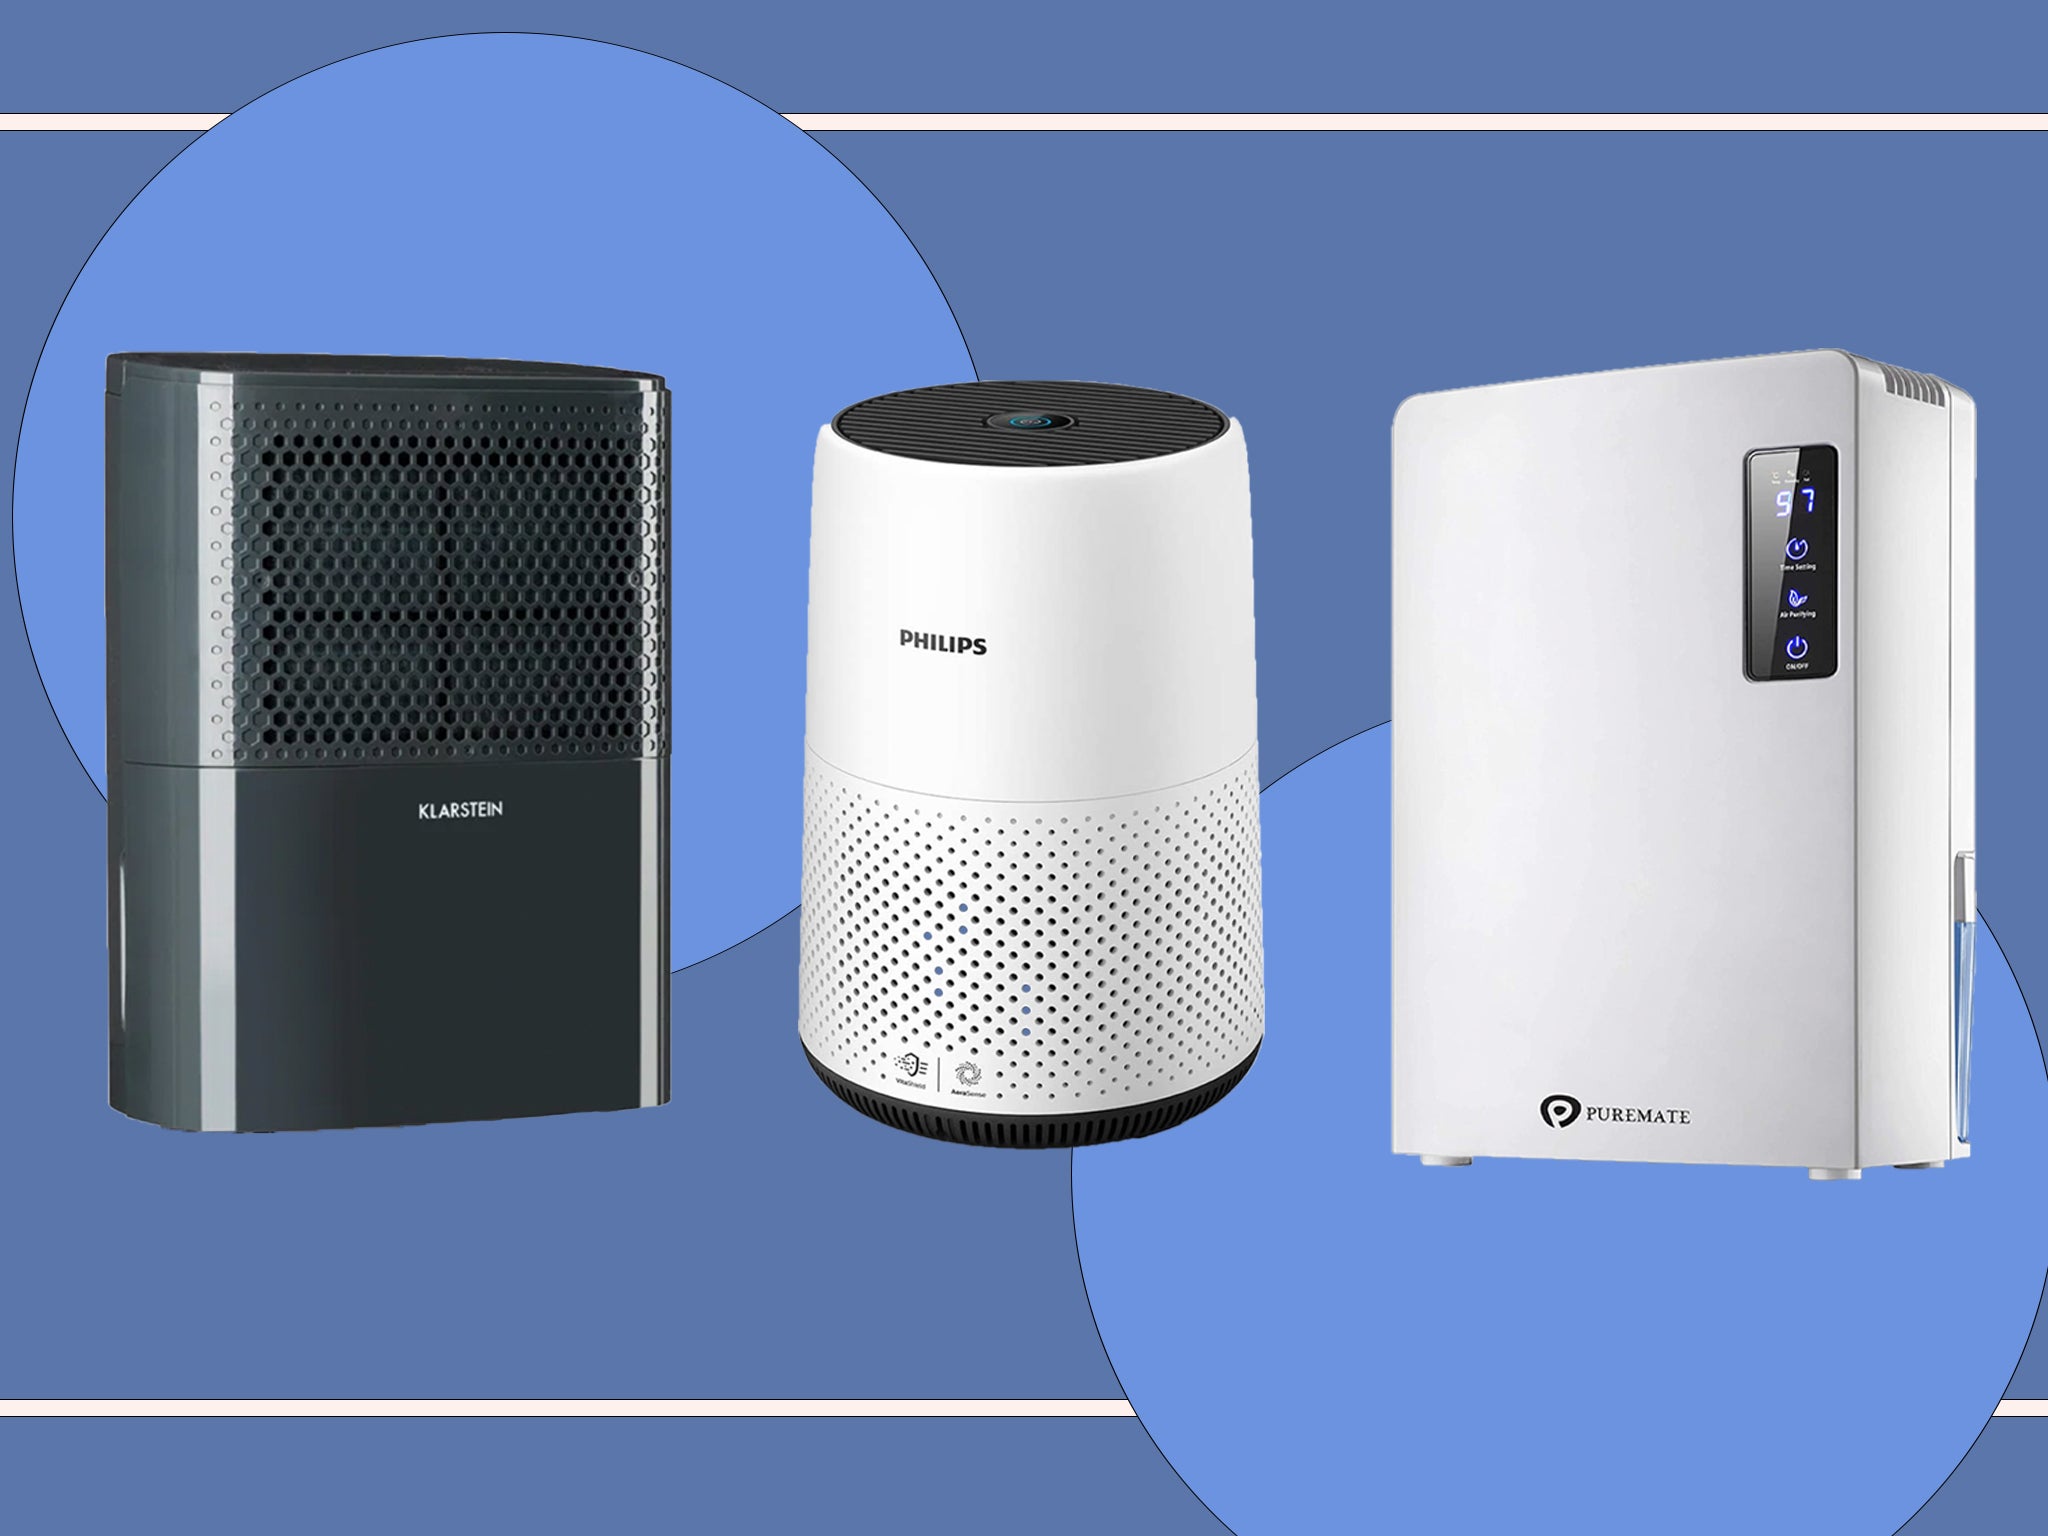 Best dehumidifier deals: Shop savings from Philips, DeLonghi, Silentnight and more